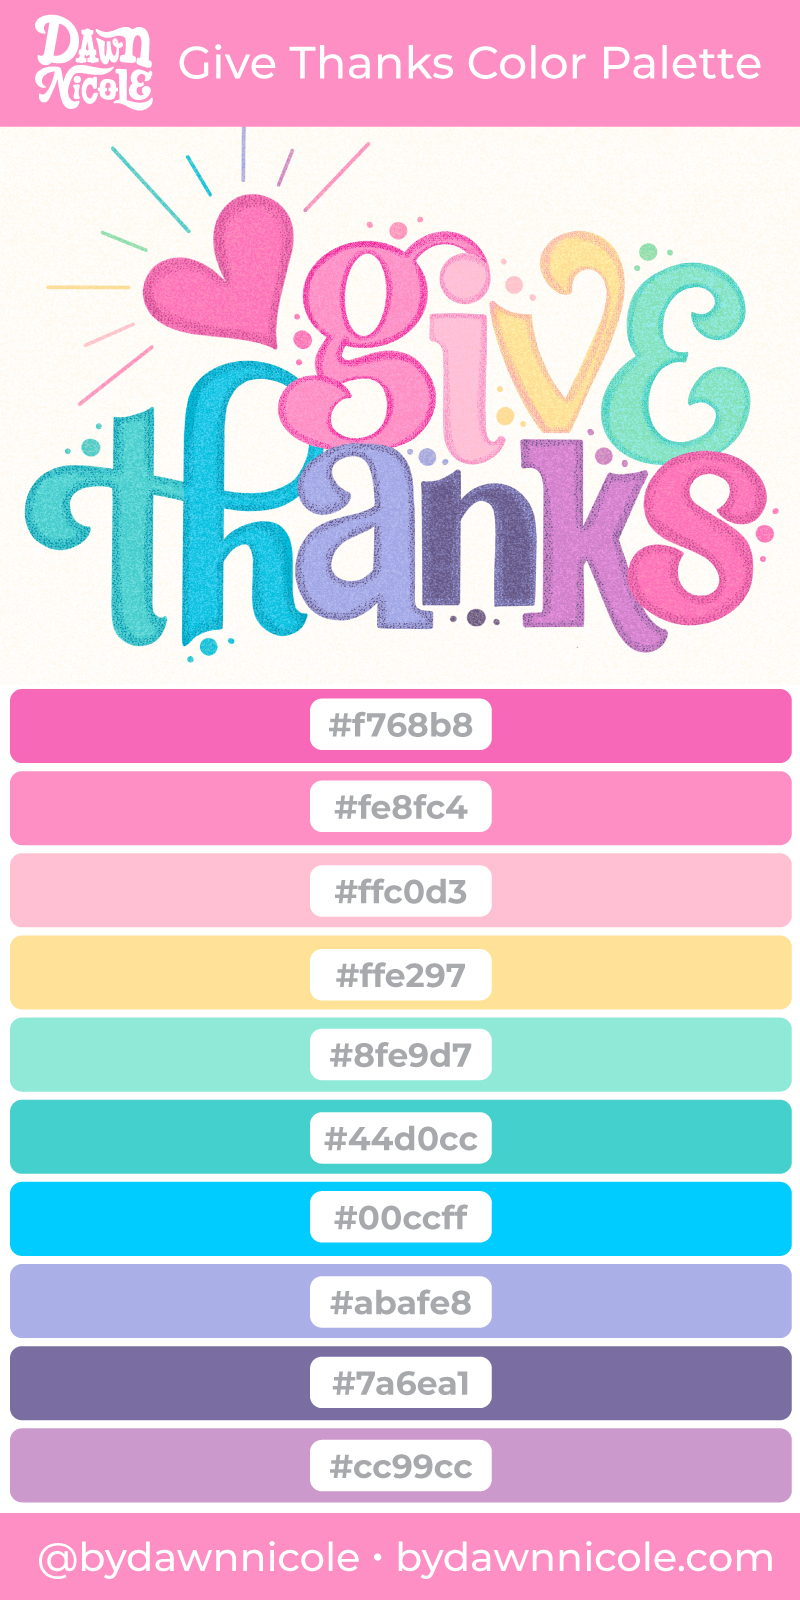 Give Thanks Color Palette. Grab the free color palette I used to create this “Give Thanks” hand lettering in the Procreate app!